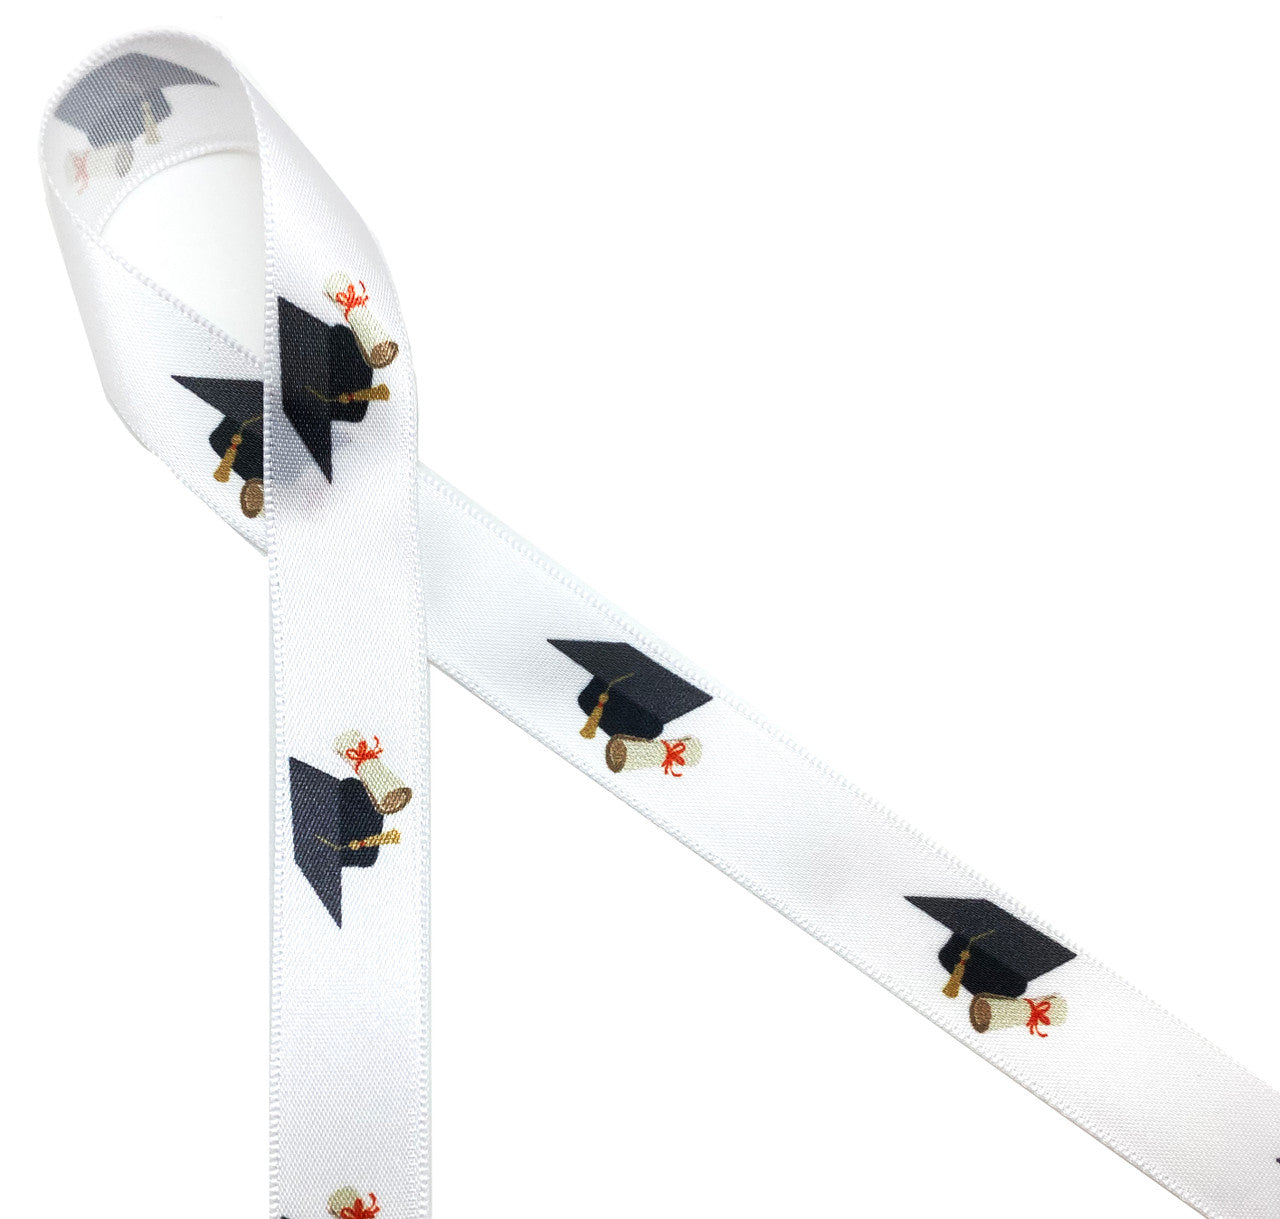 Mortar boards in black with a gold tassel and rolled diploma tied with a red ribbon printed on 5/8" white single face satin ribbon offered on a 10 yard spool is an ideal ribbon for graduation gifts, favors and craft projects!